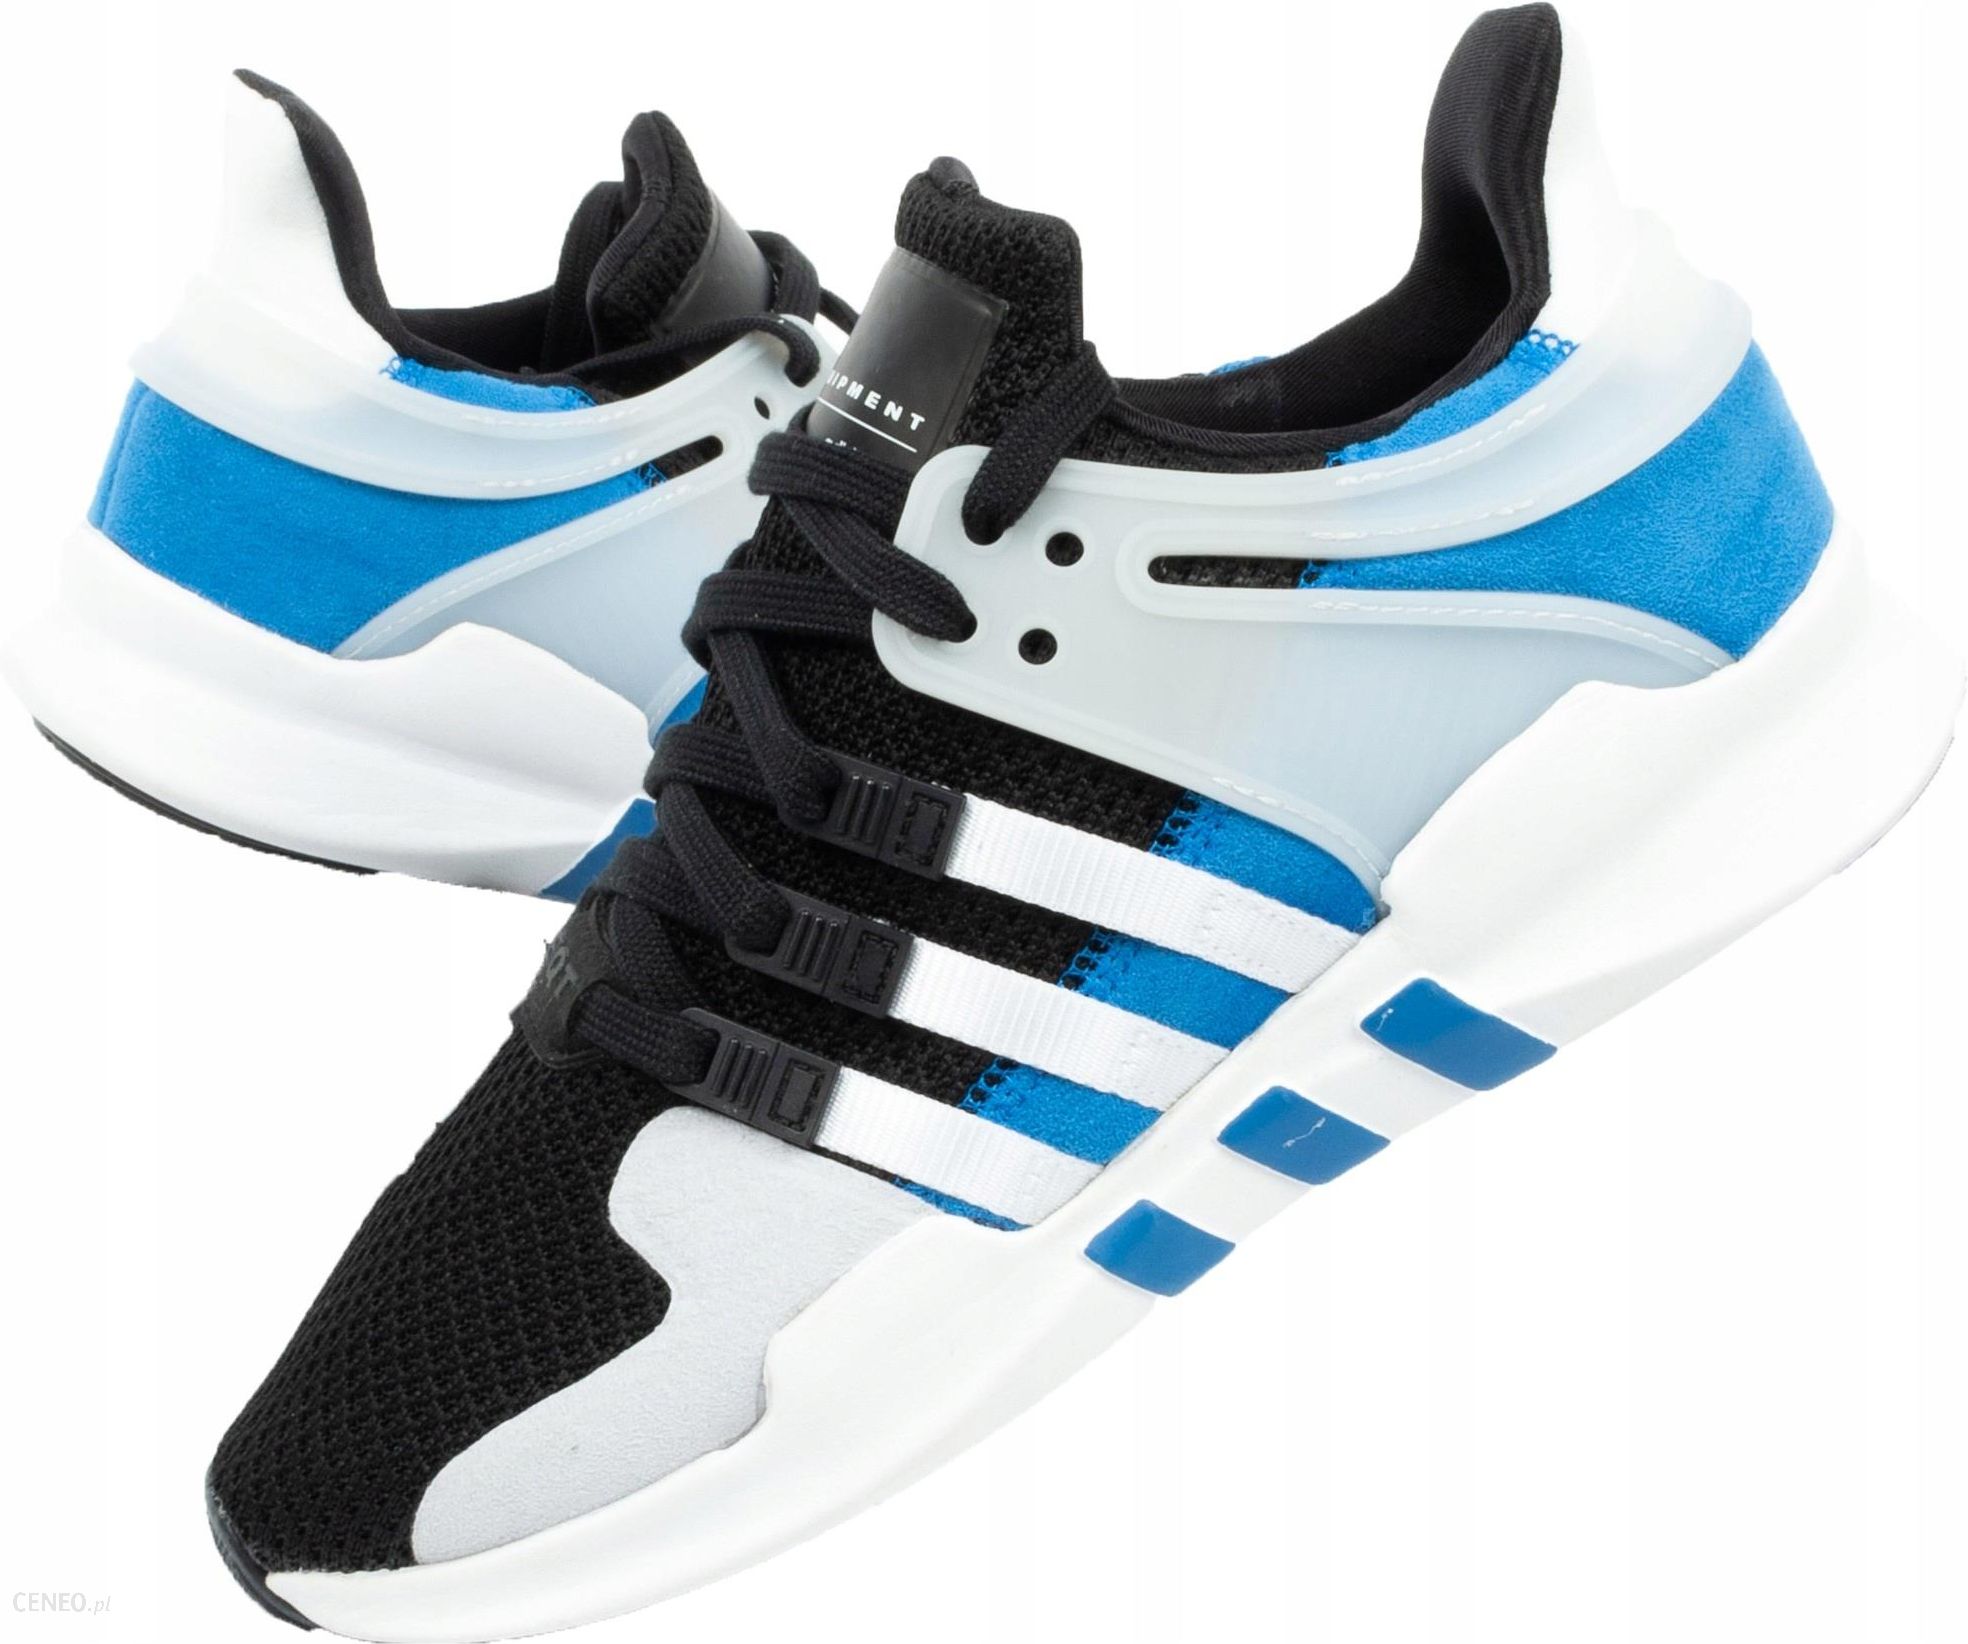 adidas eqt support adv pk by9583